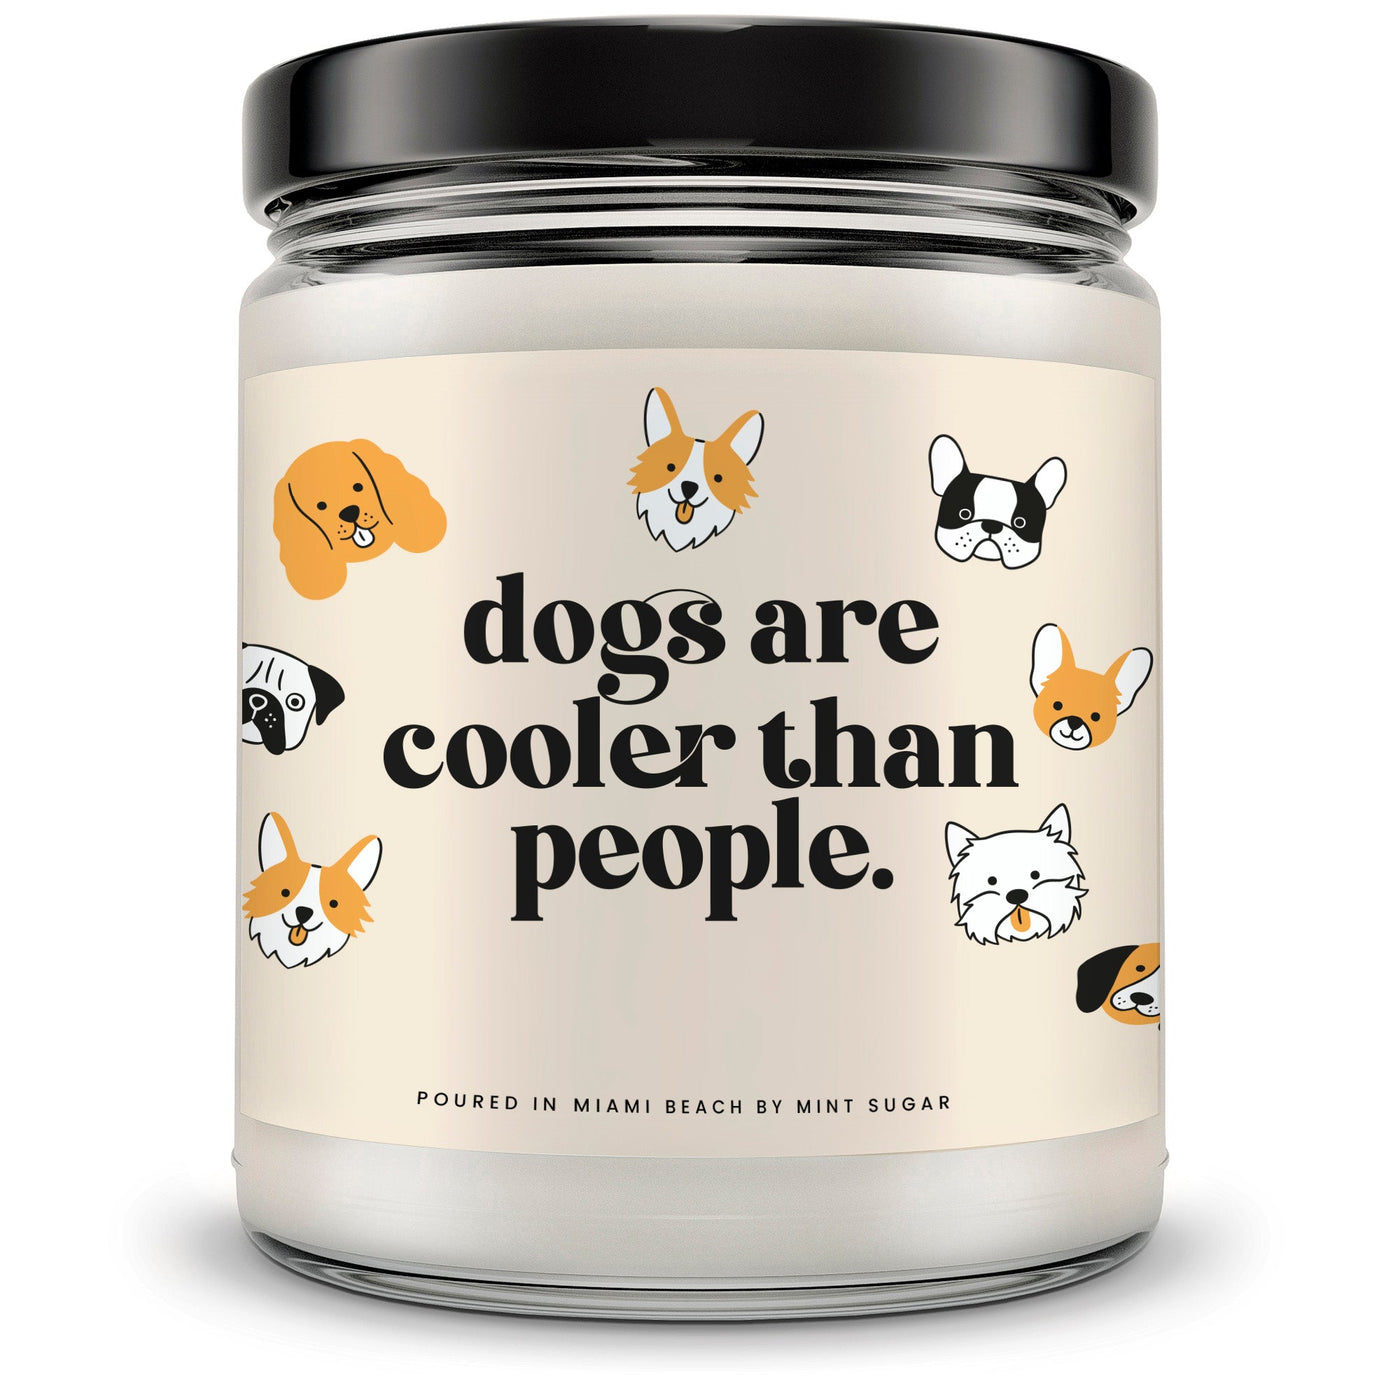 Dogs are cooler than people Candle - Mint Sugar Candle